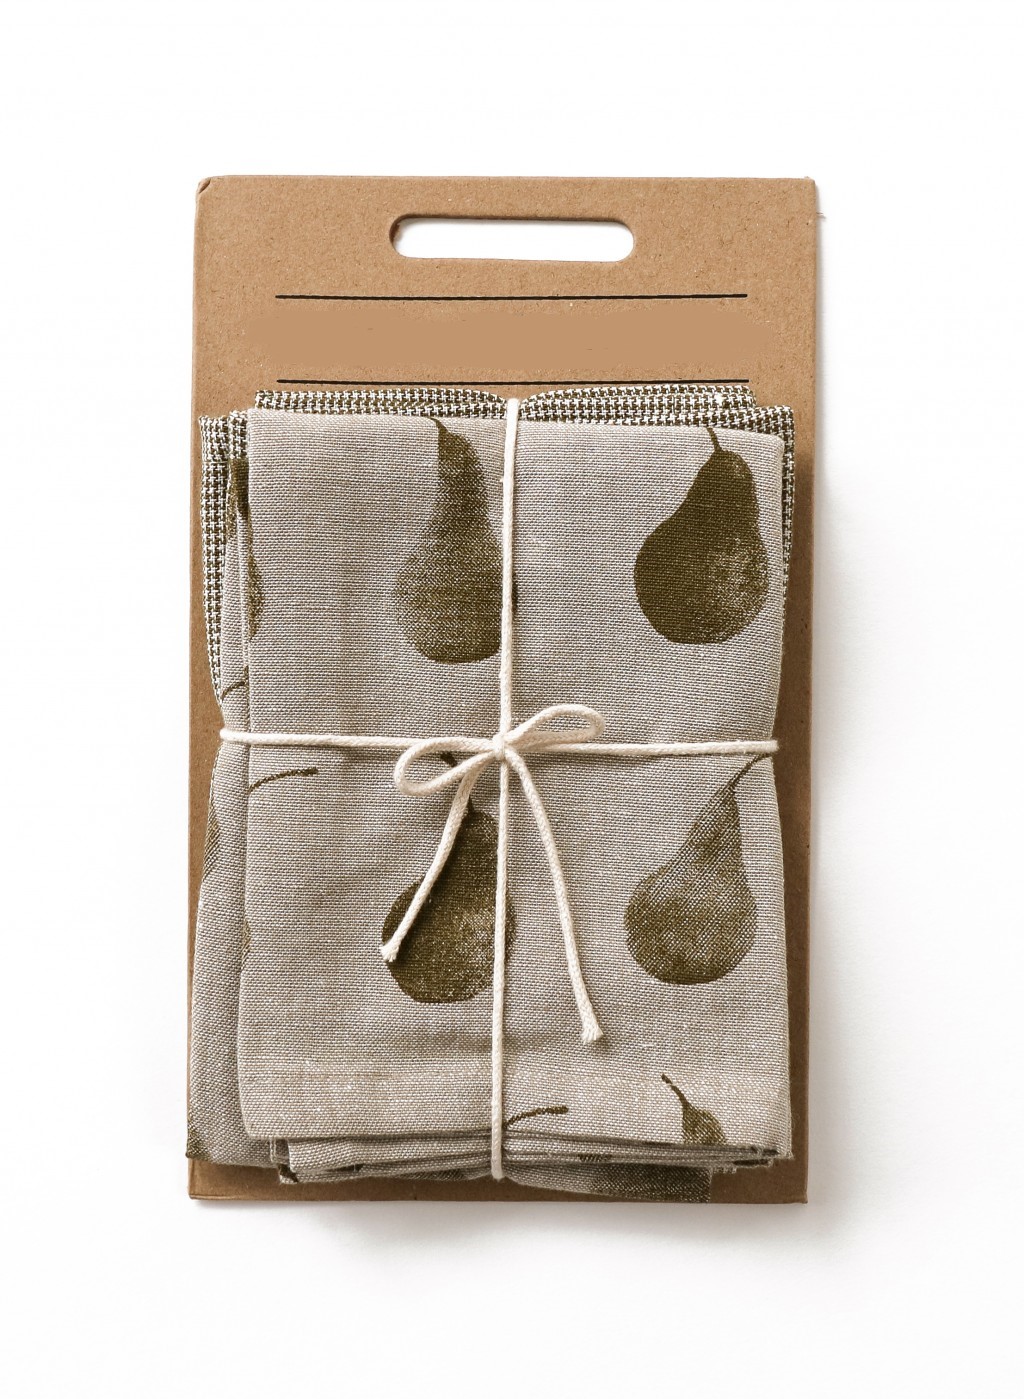 Set of Two Olive Green Tea Towels with Matching Oven Gloves